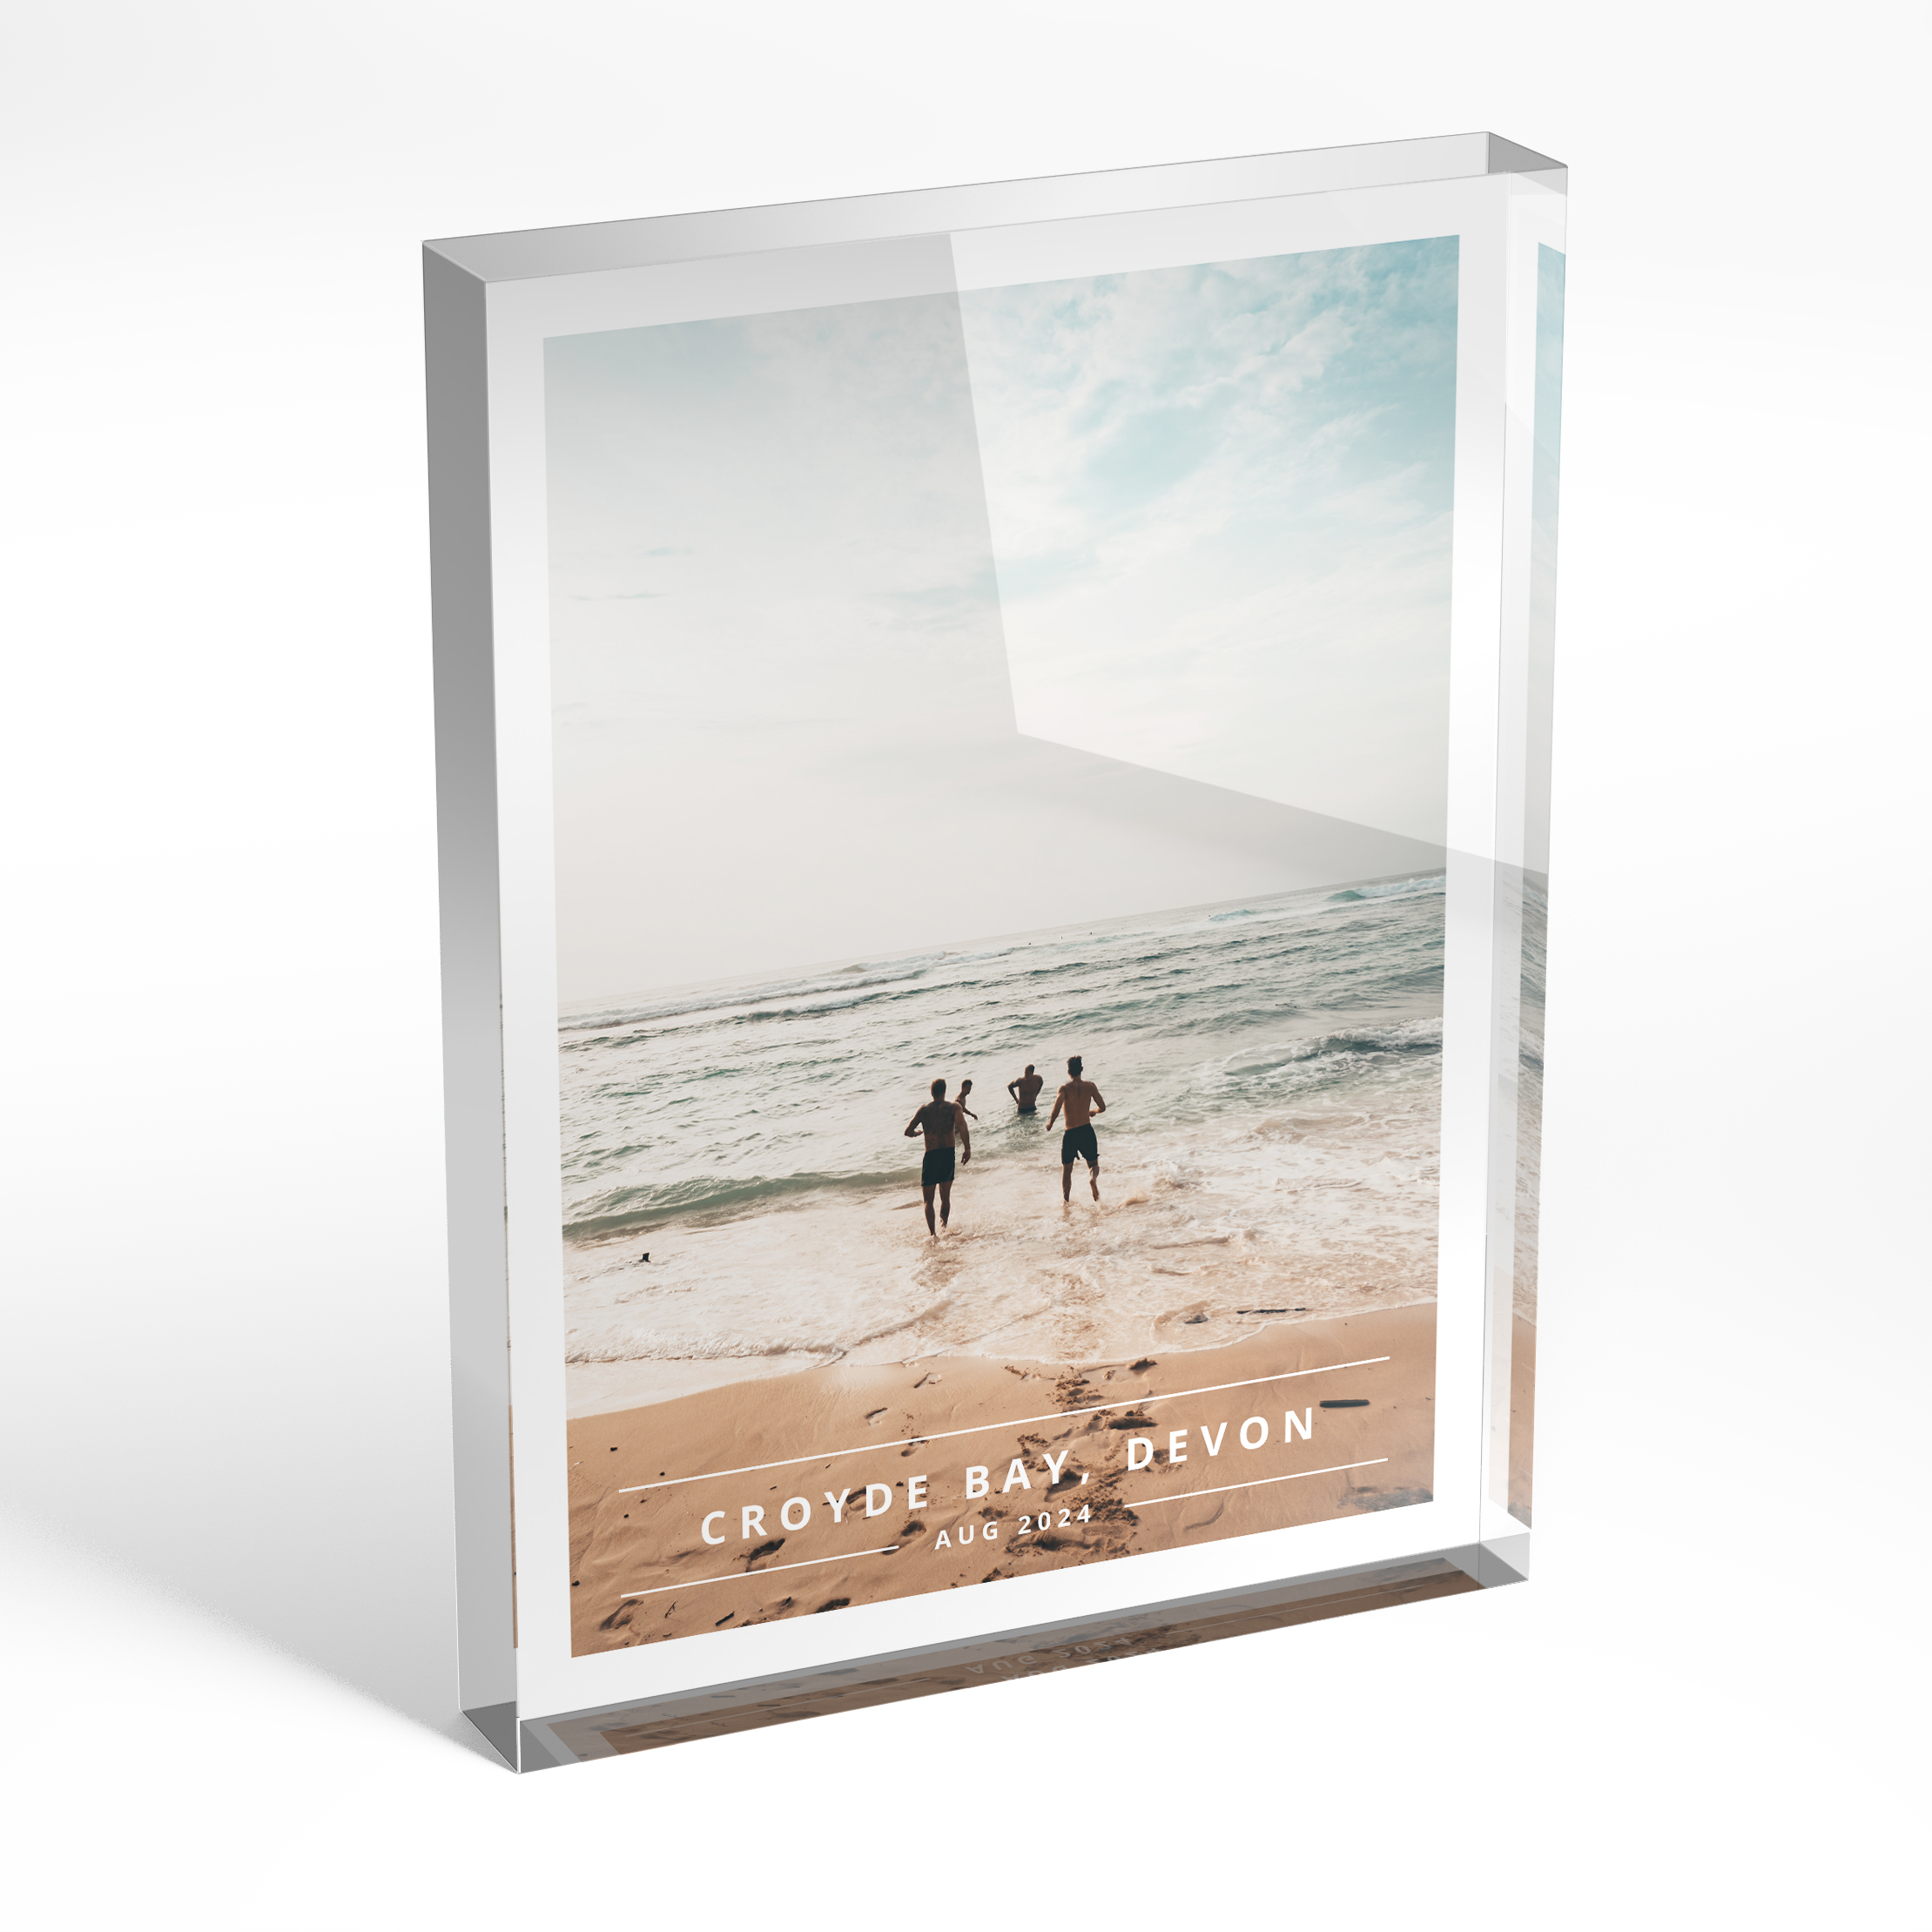 An angled side view of a portrait layout Acrylic Glass Photo Block with space for 1 photo. Thiis design is named "There and then". 